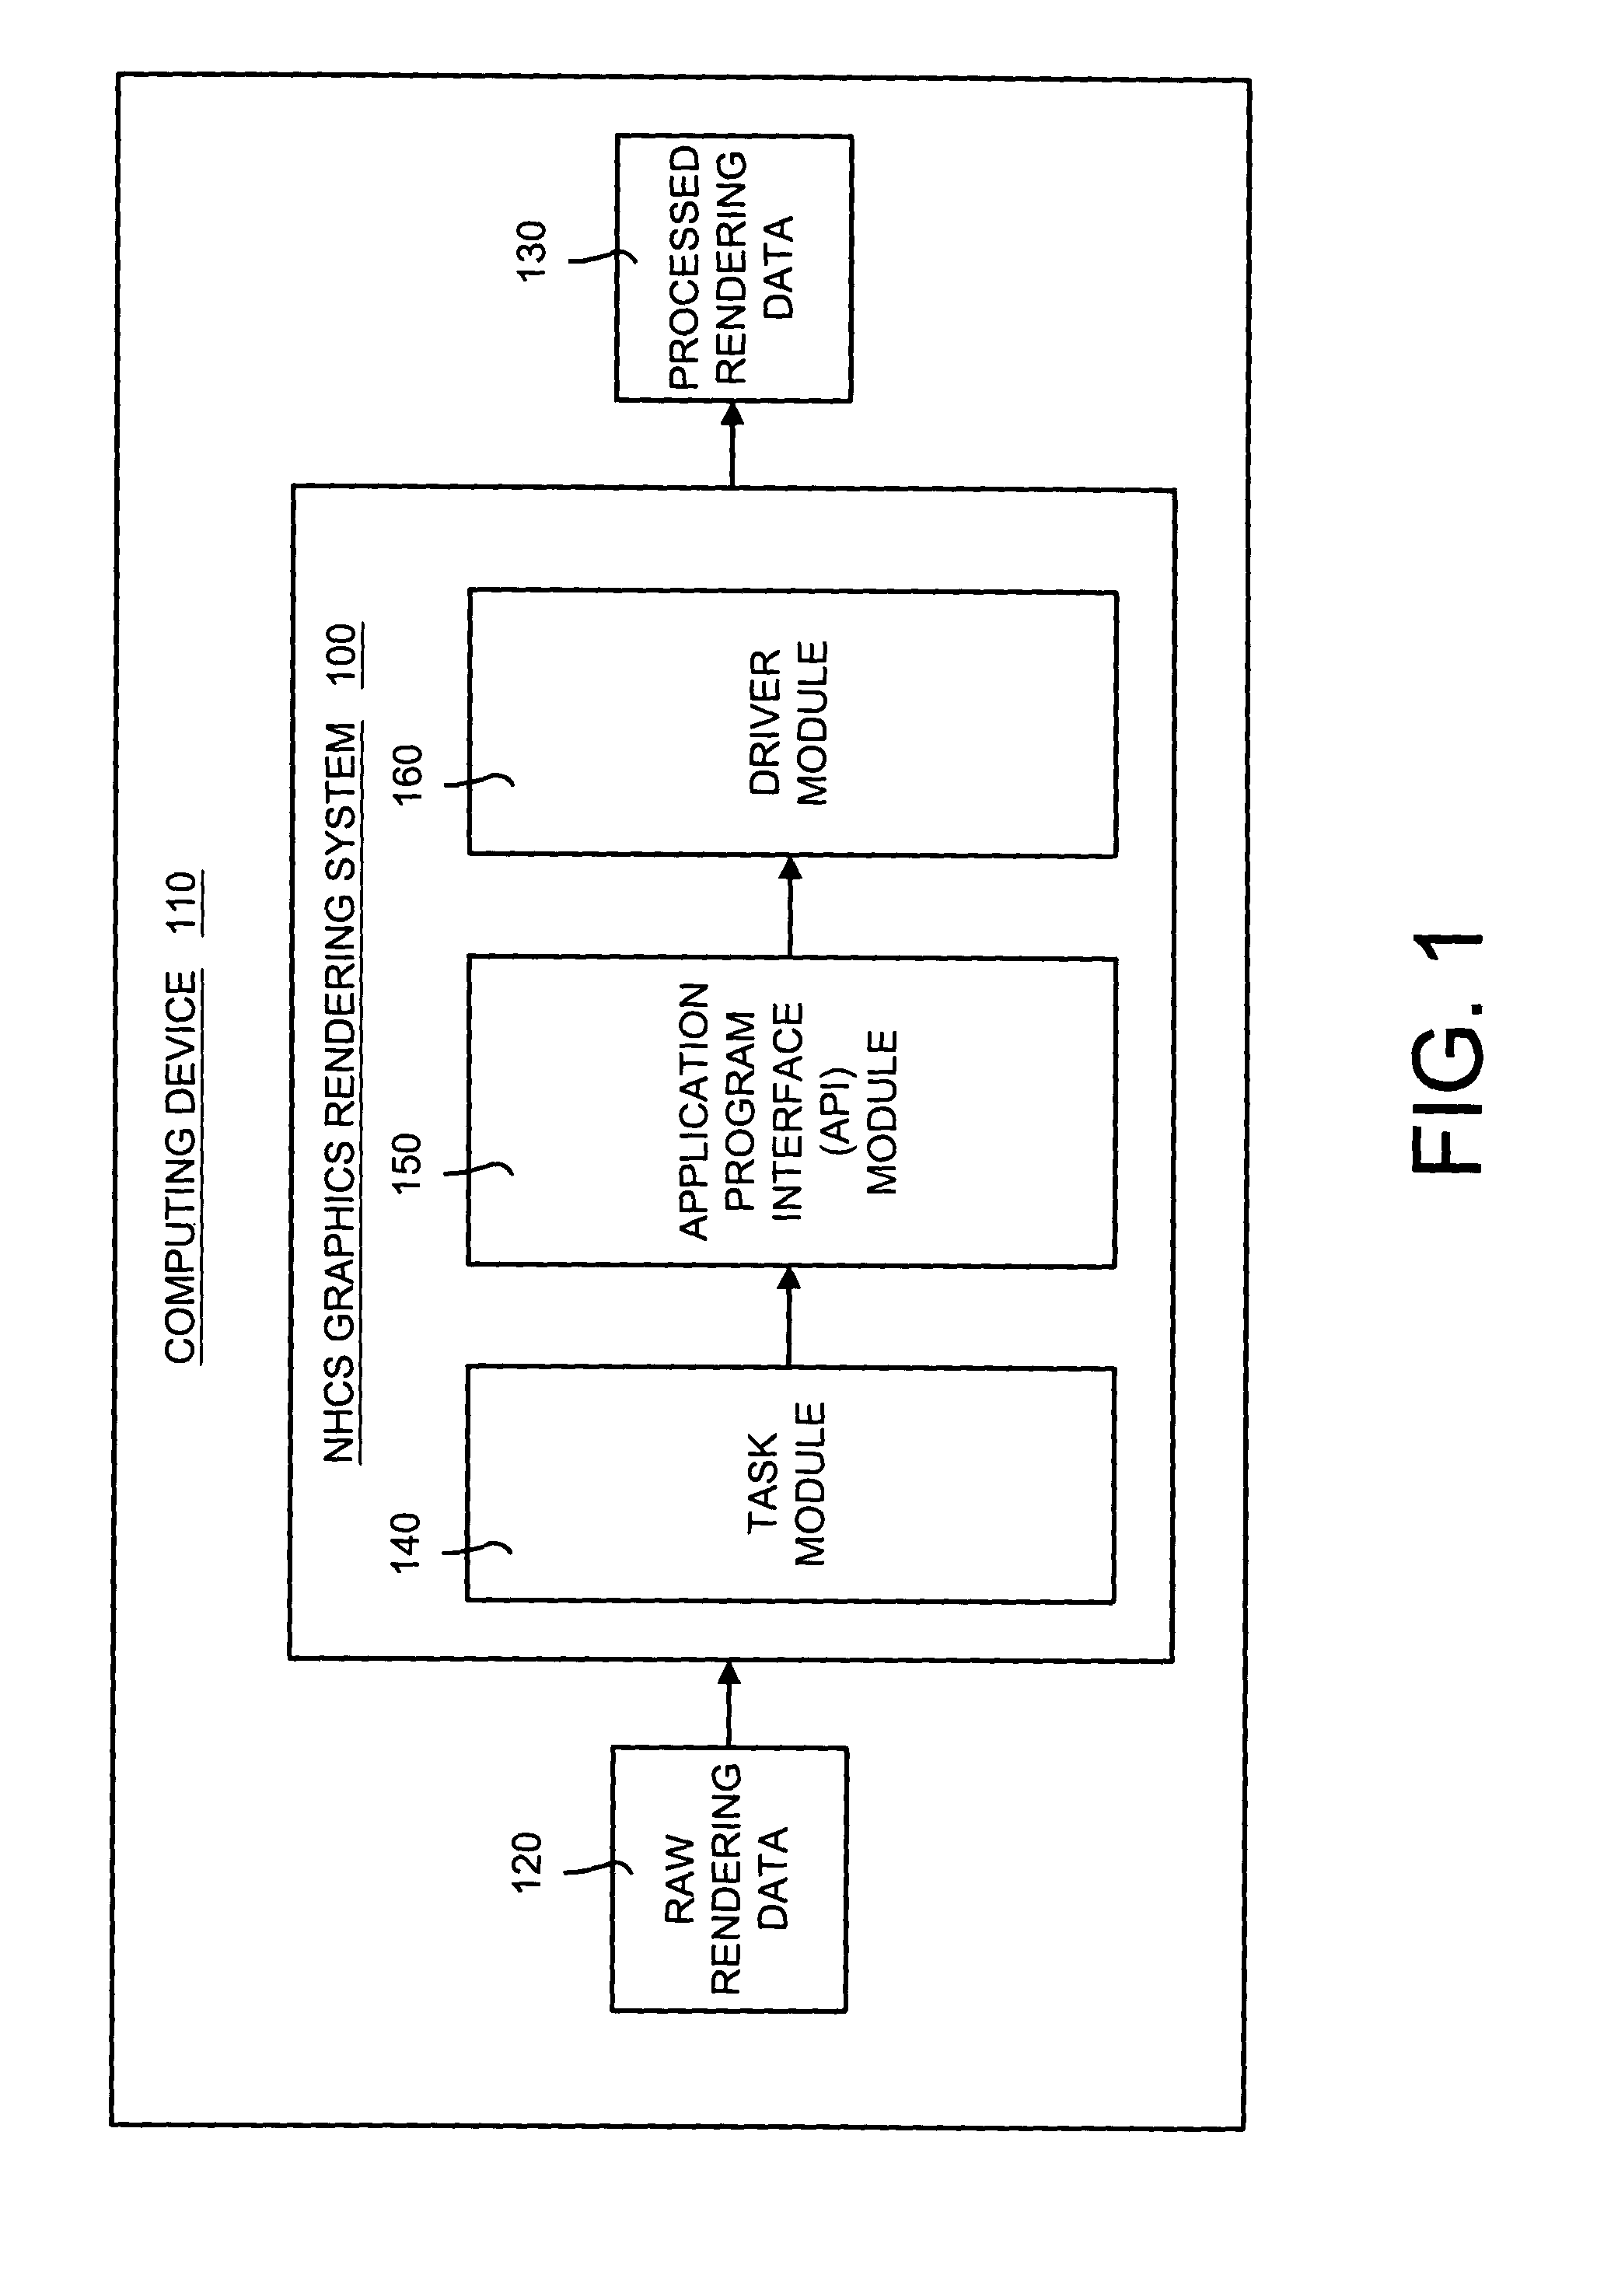 Optimized fixed-point mathematical library and graphics functions for a software-implemented graphics rendering system and method using a normalized homogenous coordinate system